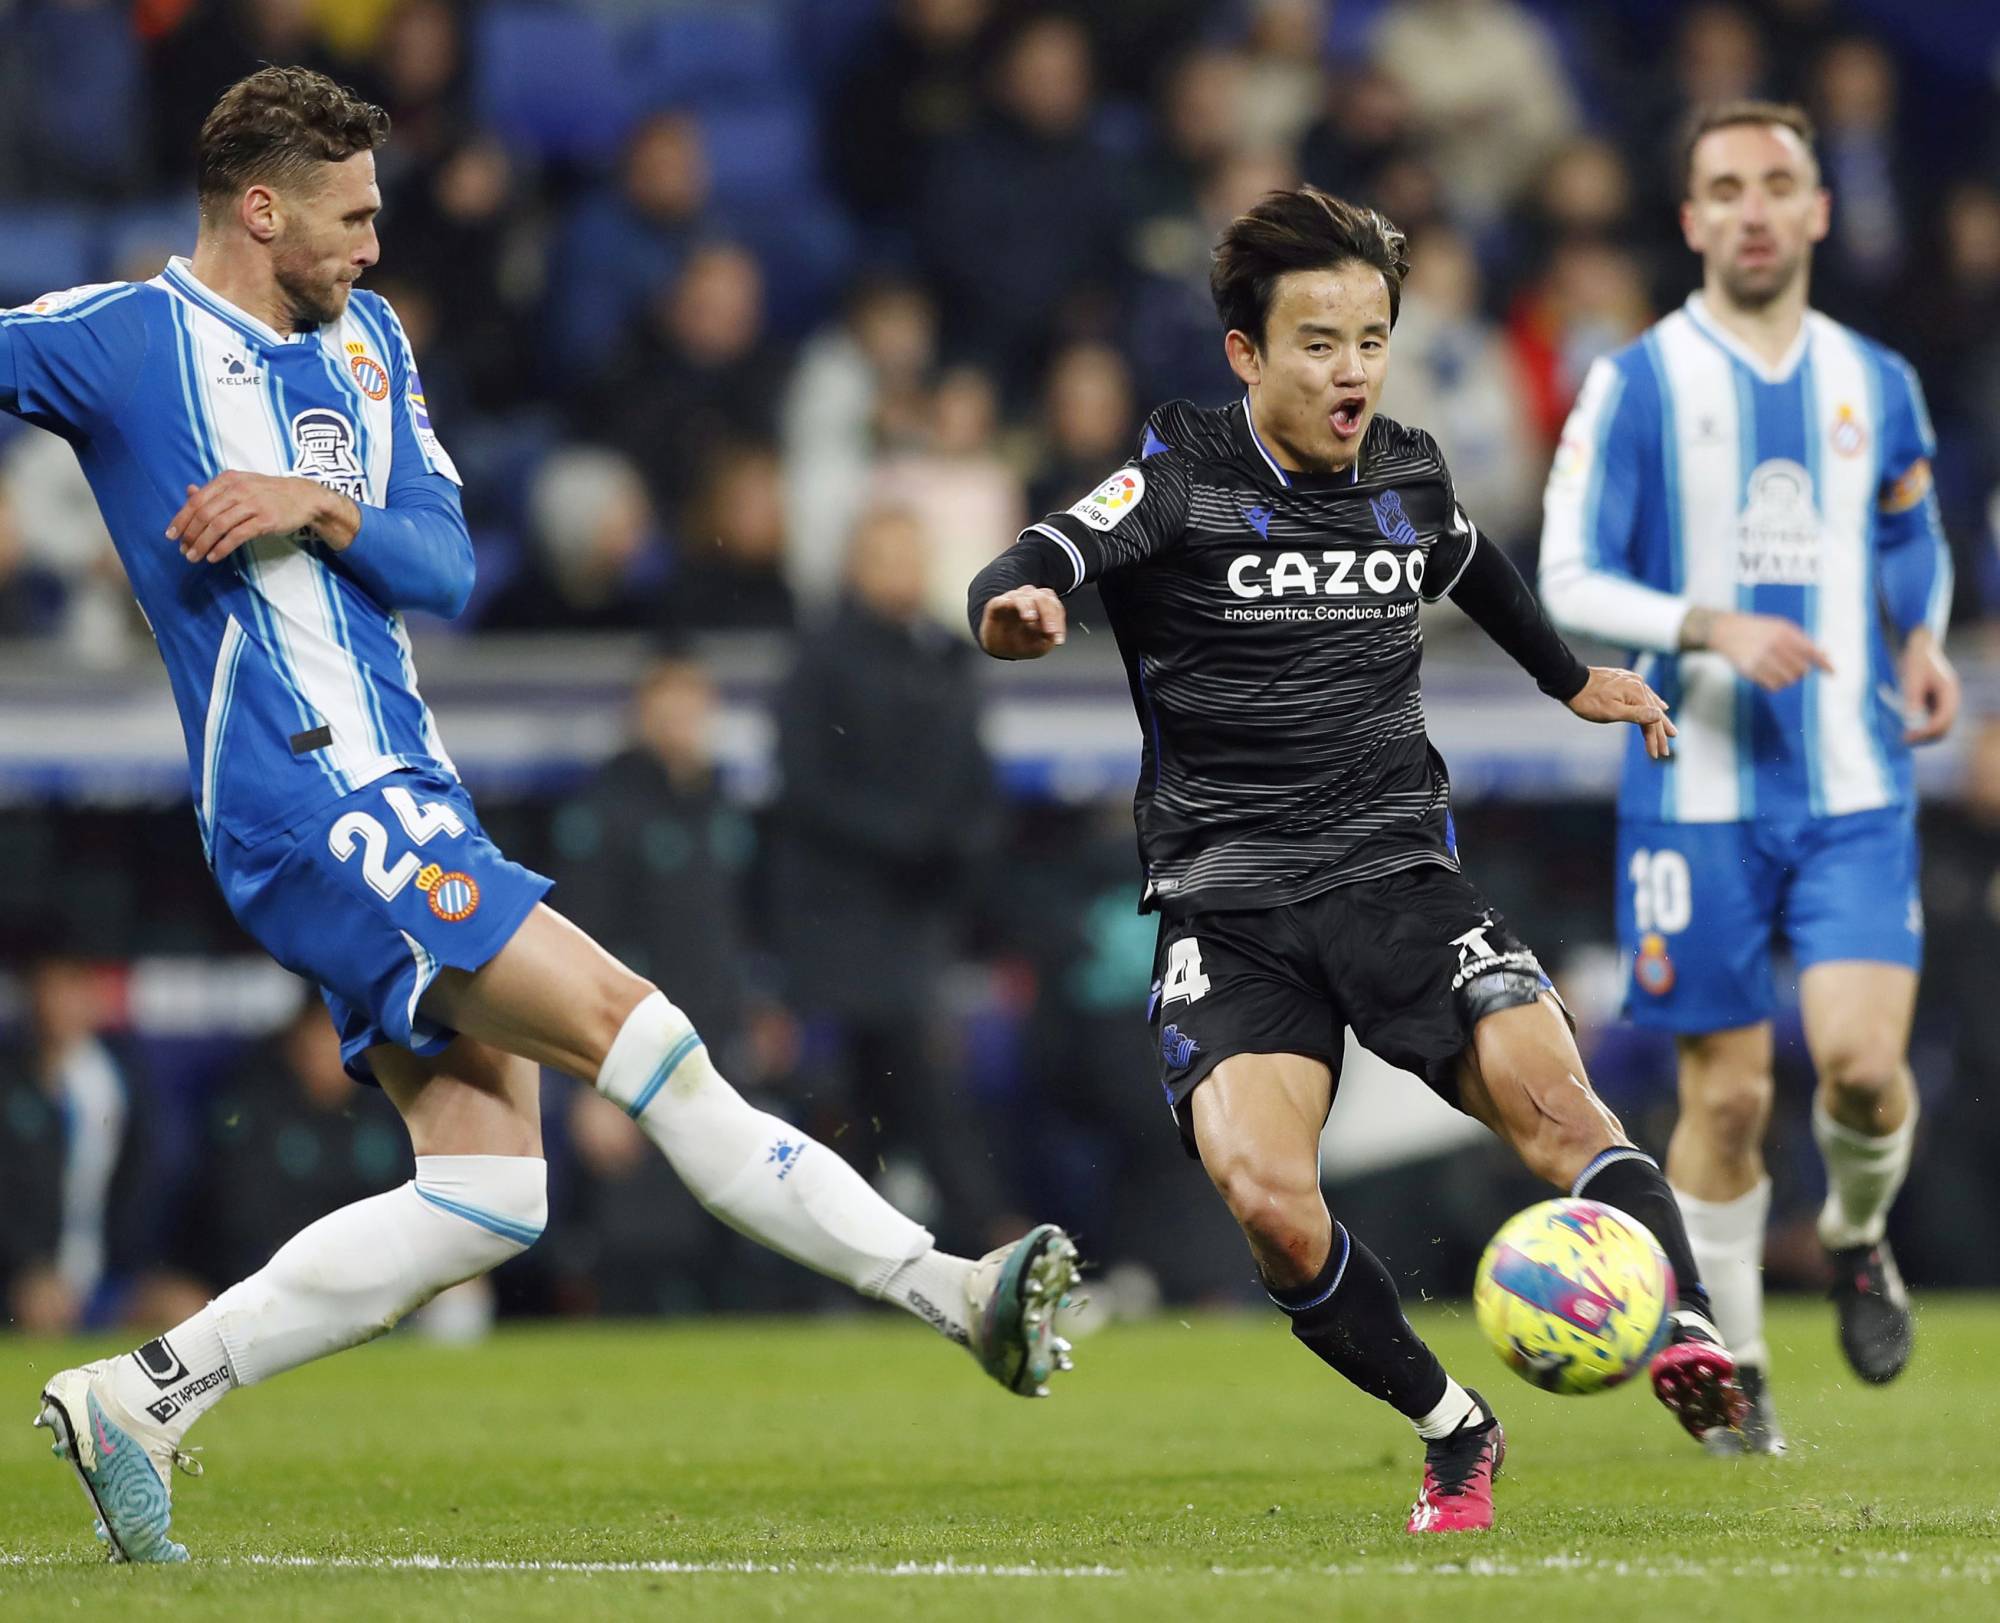 Takefusa Kubo nets opener, forces own goal in Real Sociedad win